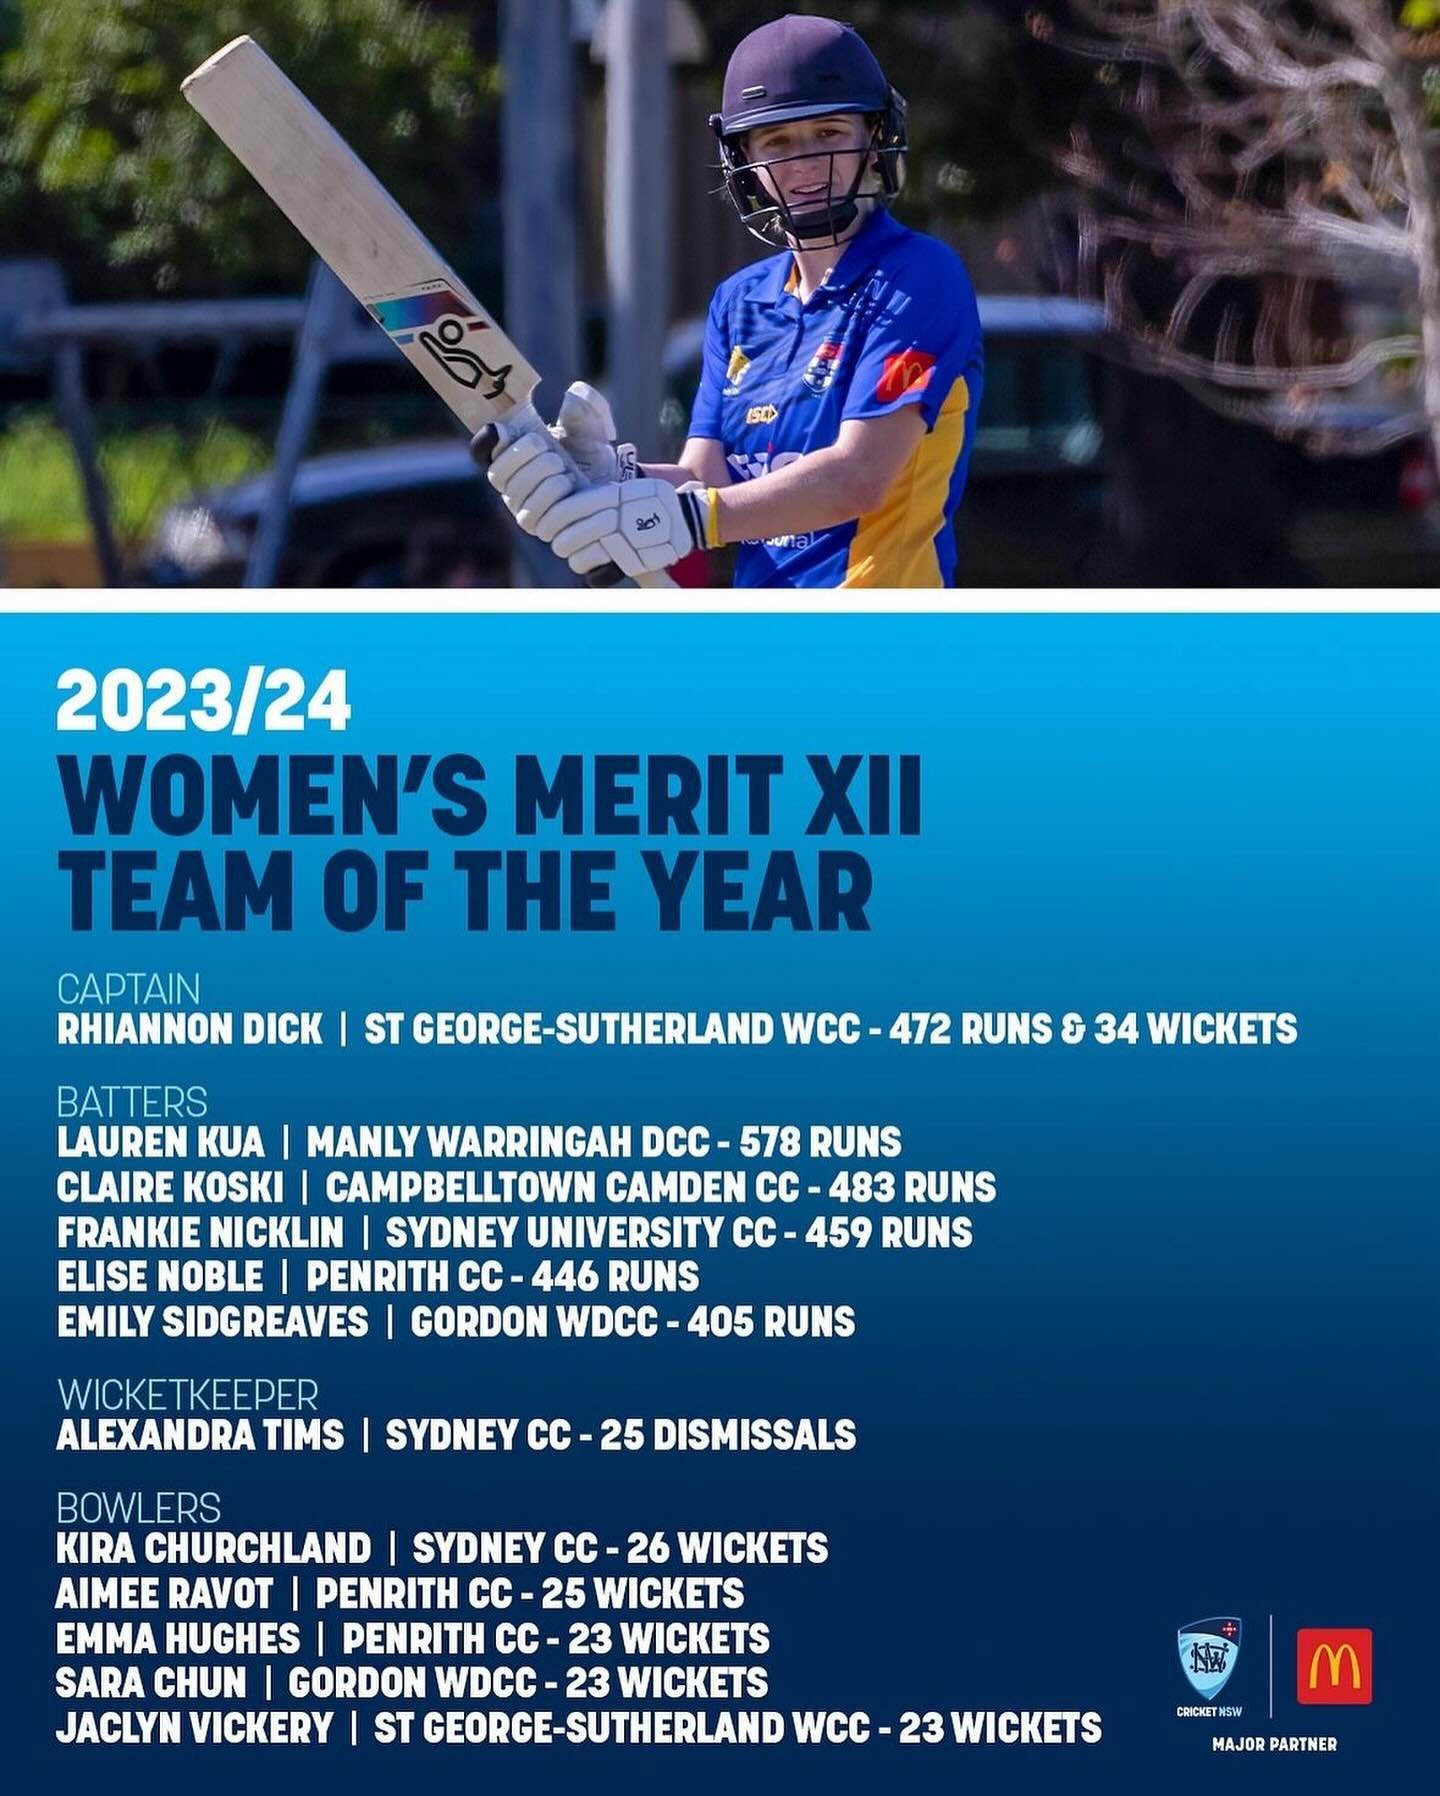 Congratulations to Frankie Nicklin in her first full season for SUCC in being selected for the NSW Premier Cricket Womens Merit Team of the Season. 

We are all excited to see you performing at your best again in Season 2024/25 💪💪💪🏏🏏🏏 #upthestu